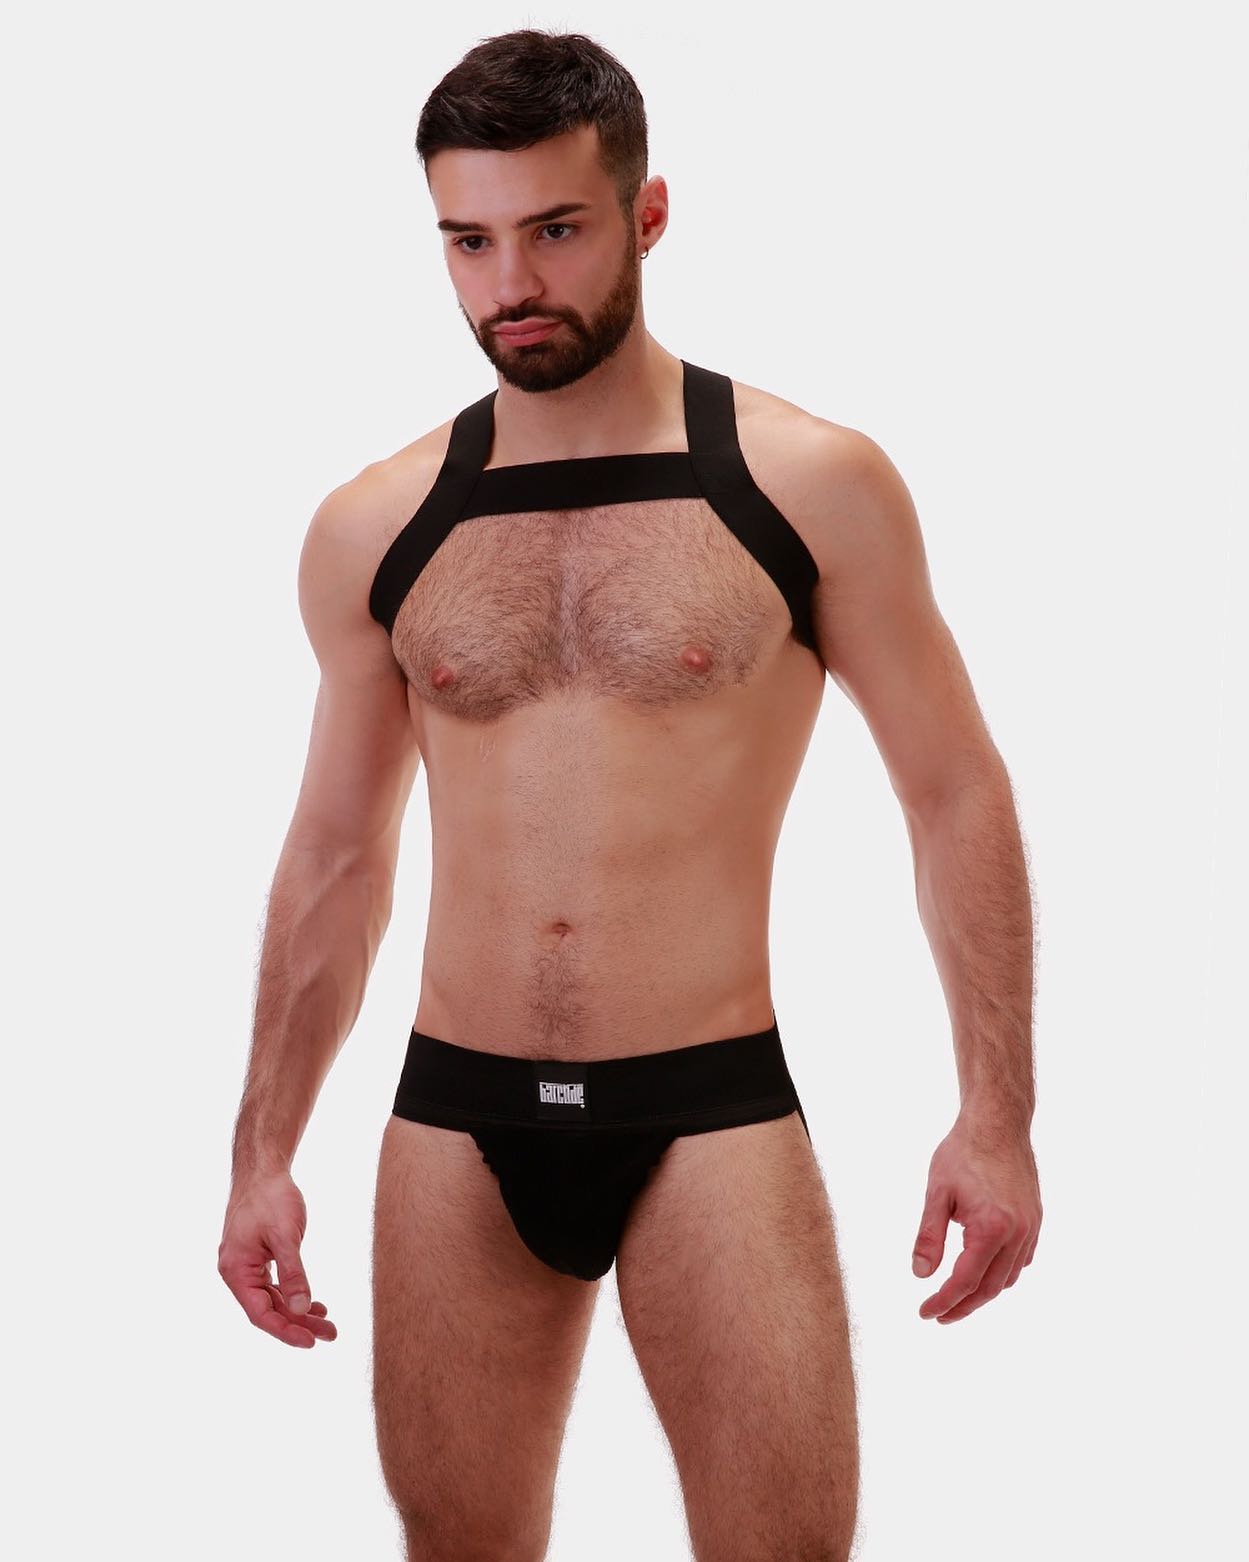 The timeless Jockstrap Sergey in black is always in fashion! Just restocked and is again available in all sizes. Get yours:
_____
https://menandunderwear.com/shop/underwear/barcode-berlin-jockstrap-sergey-black